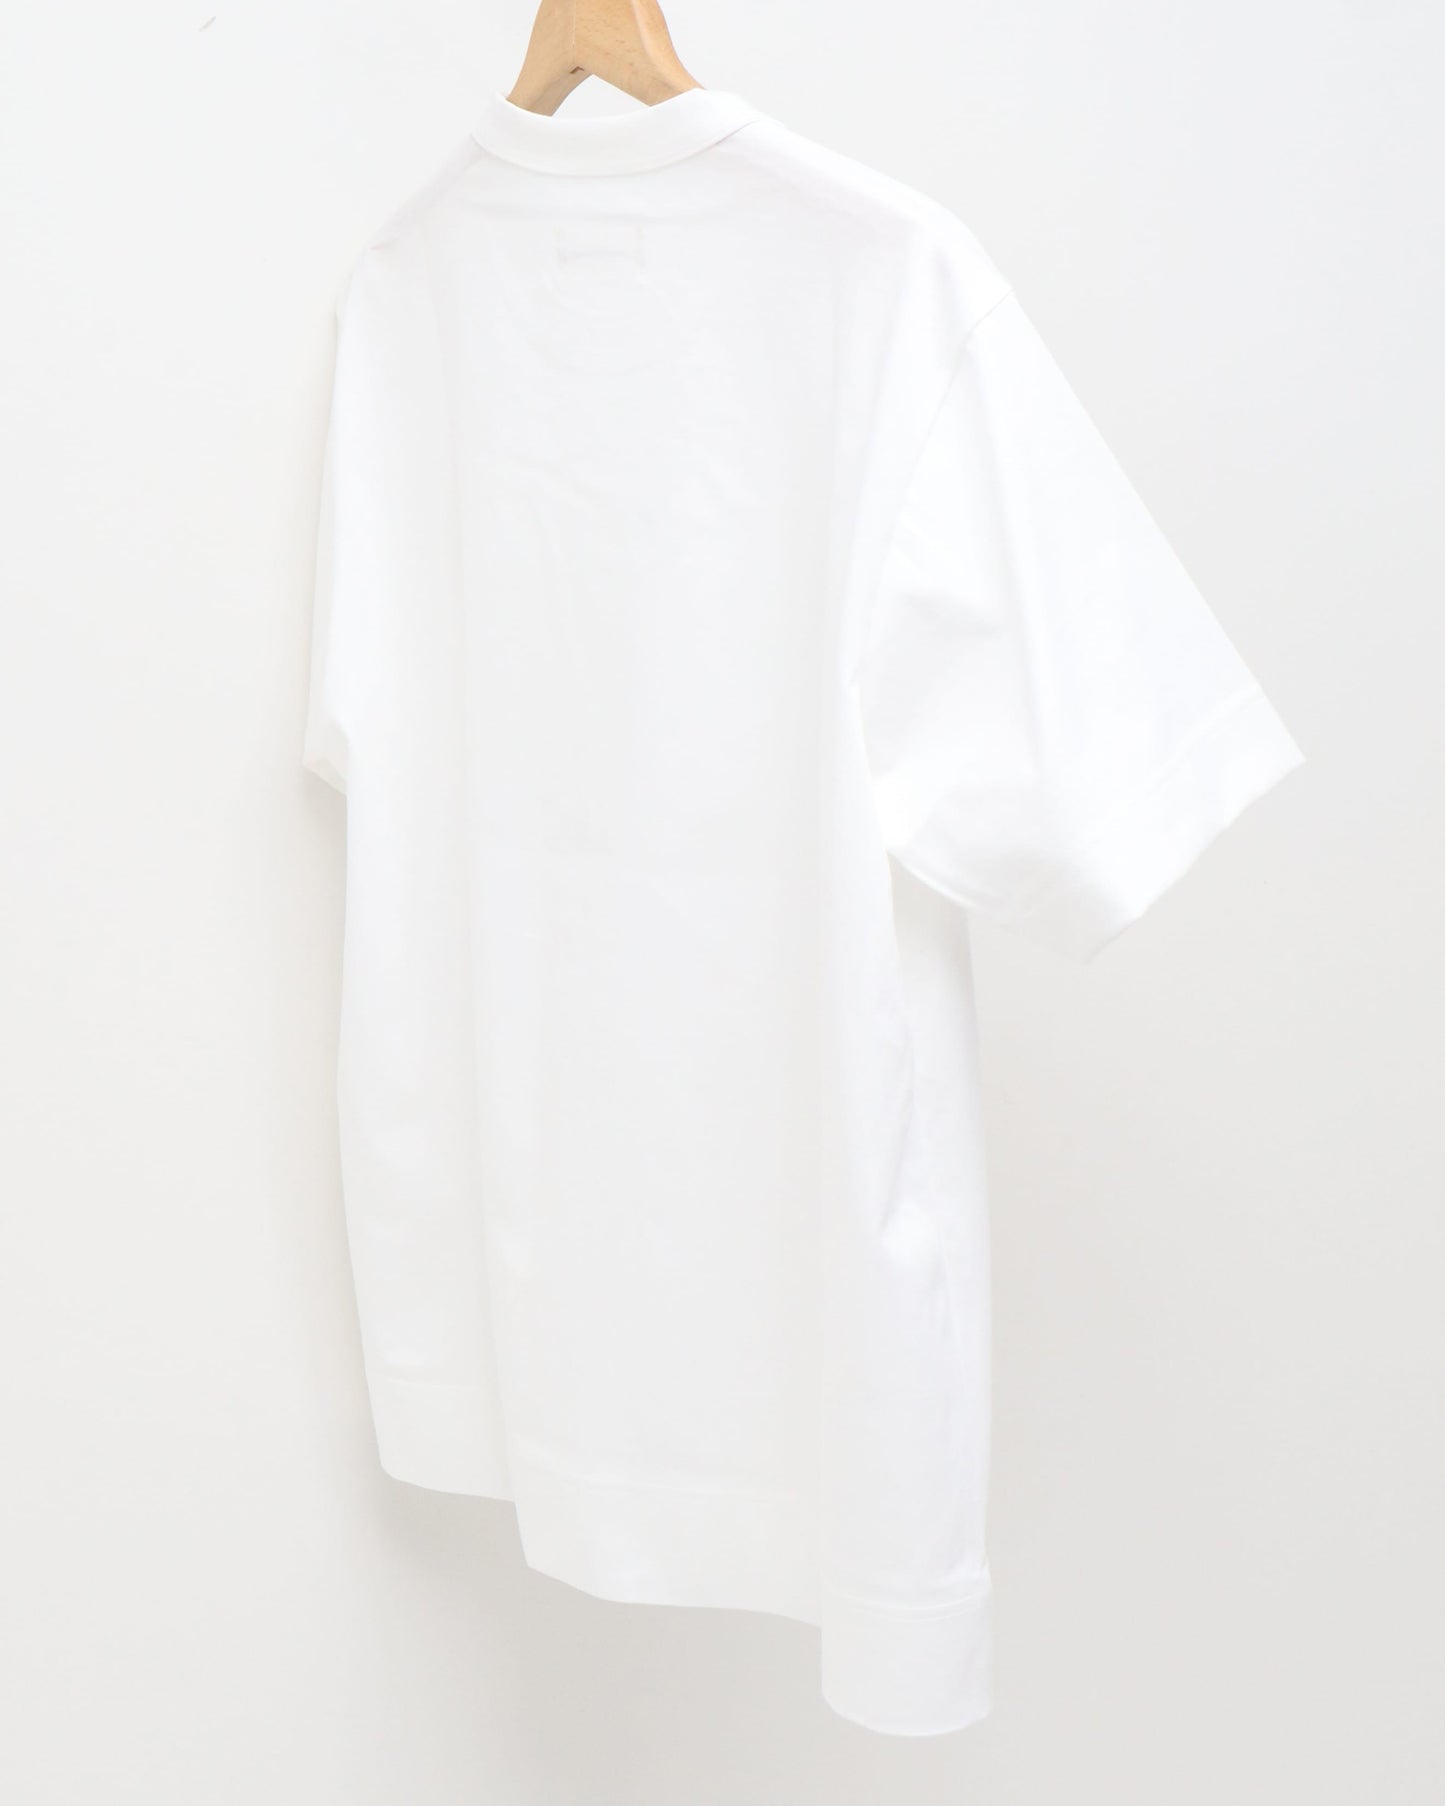 COMFORT-FIT Tee S/S WHITE